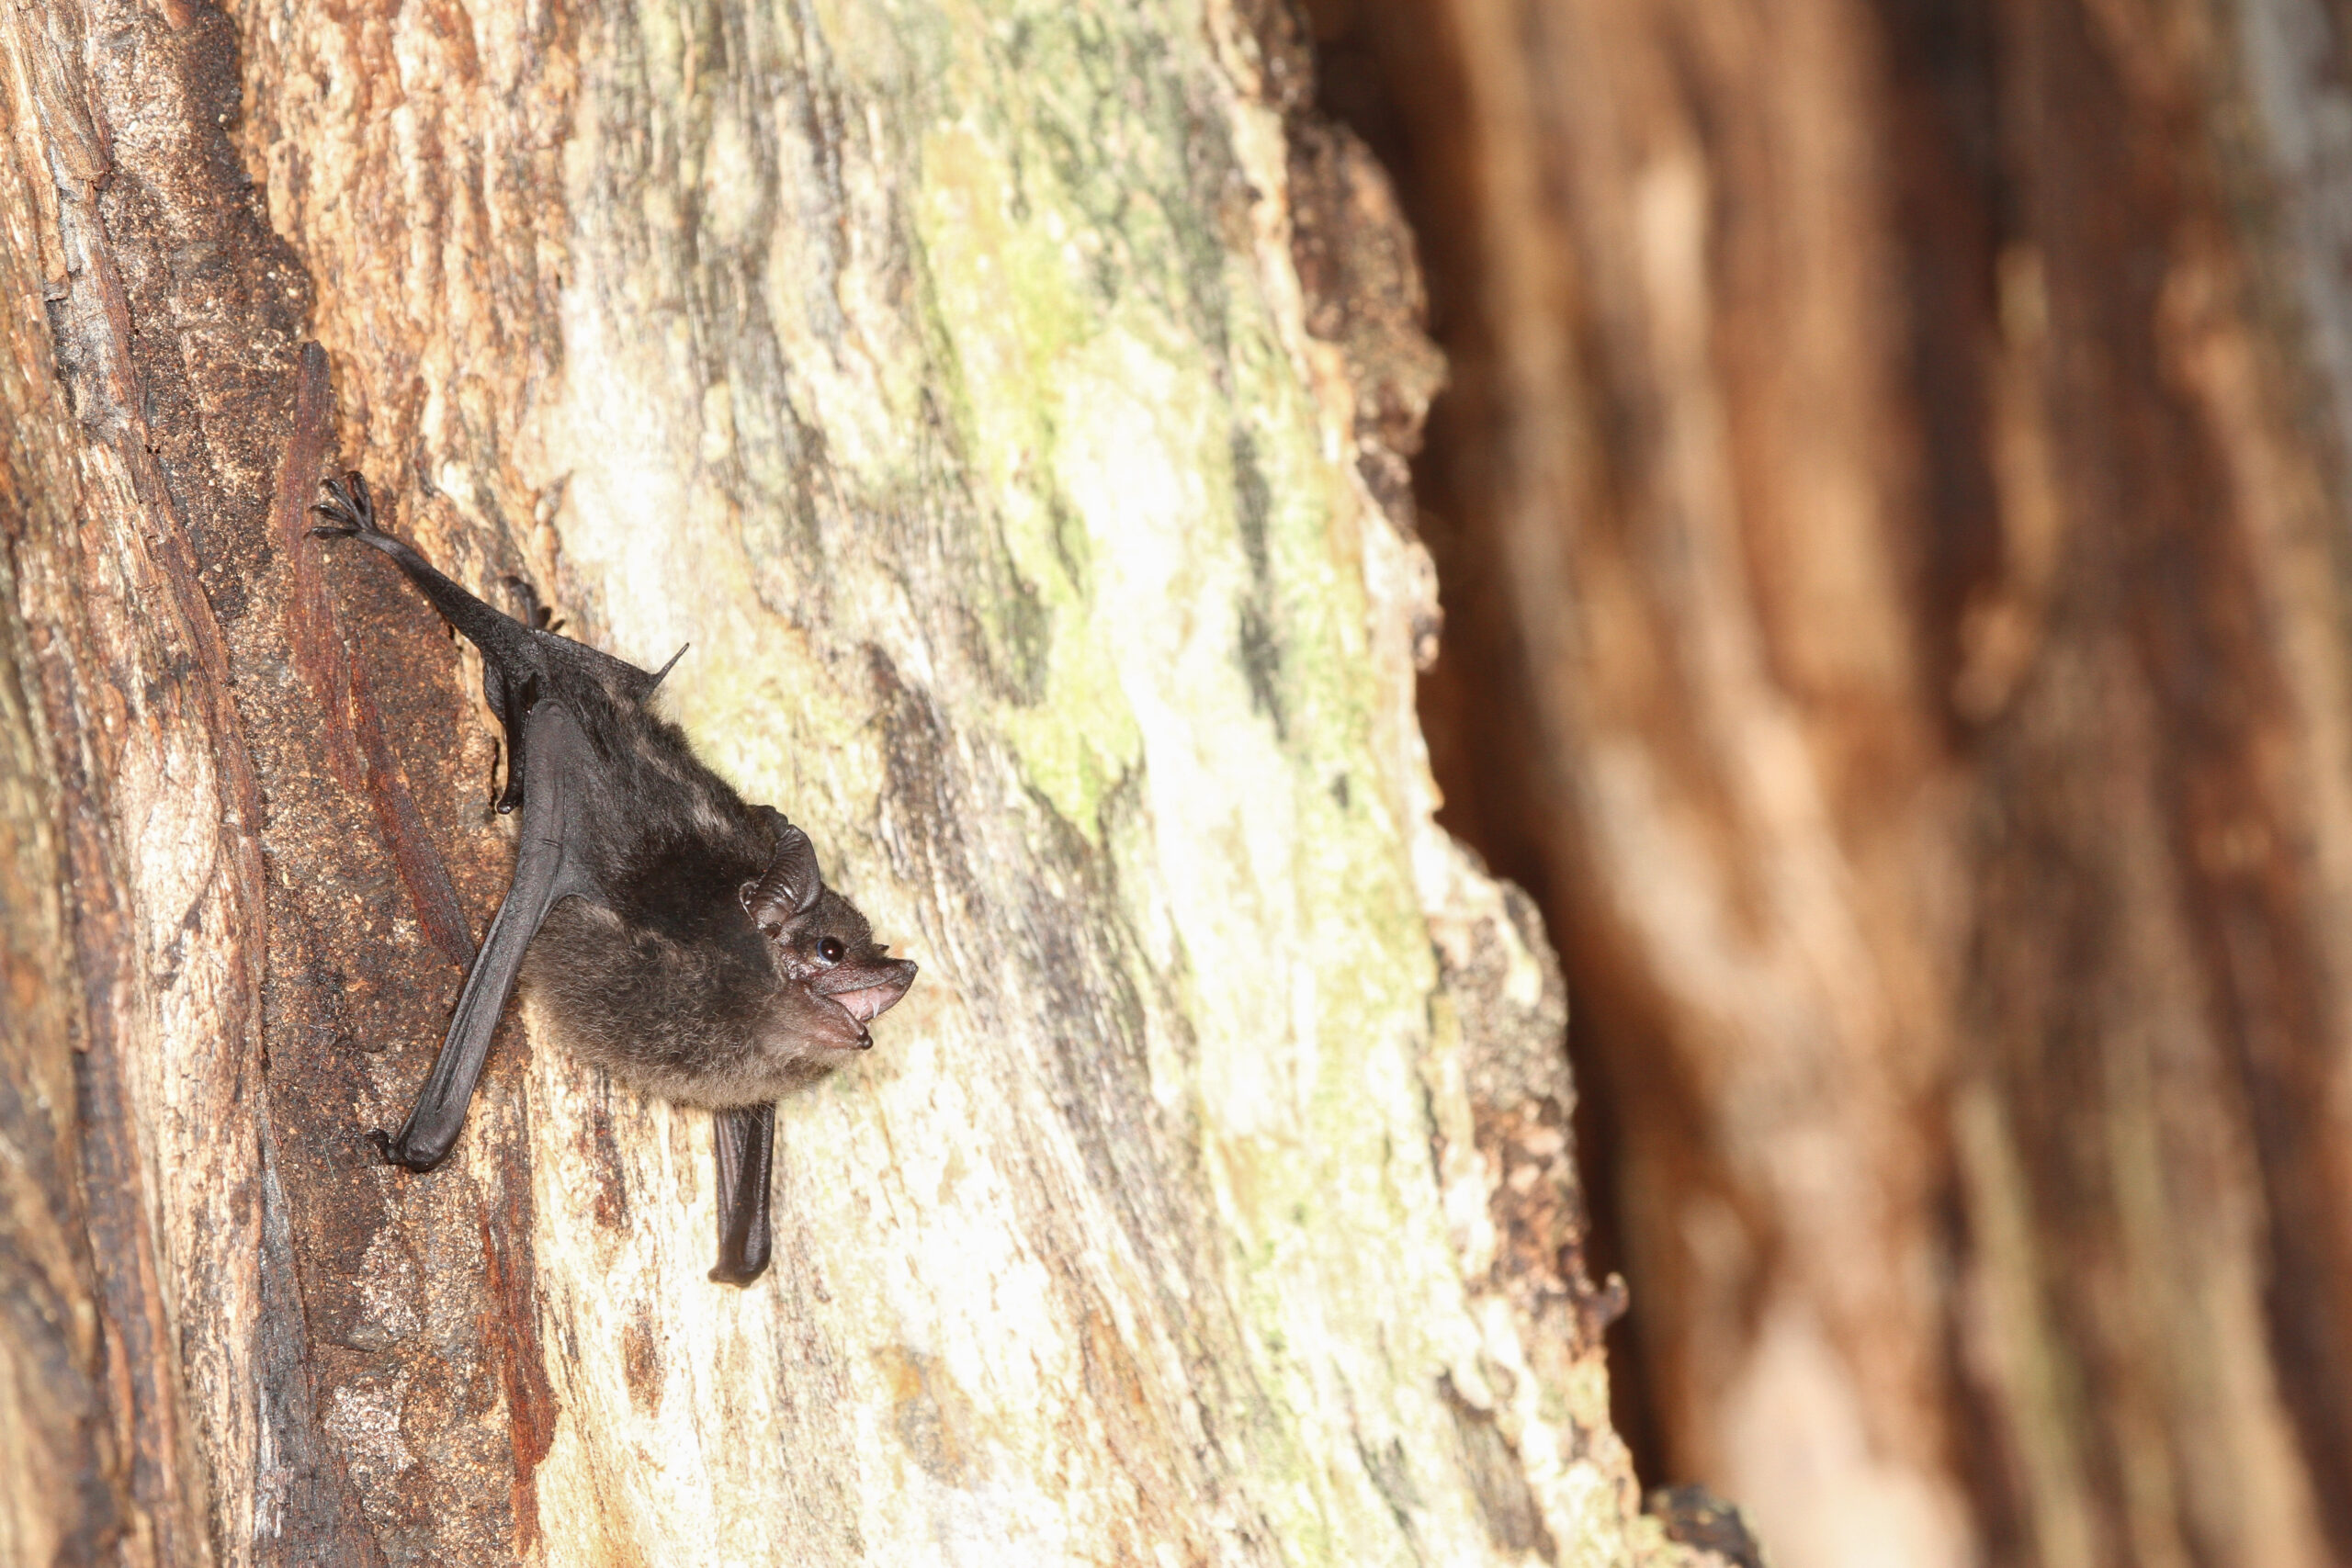 Greater Sac-winged bat pups practice talking to themselves for minutes at a time. 